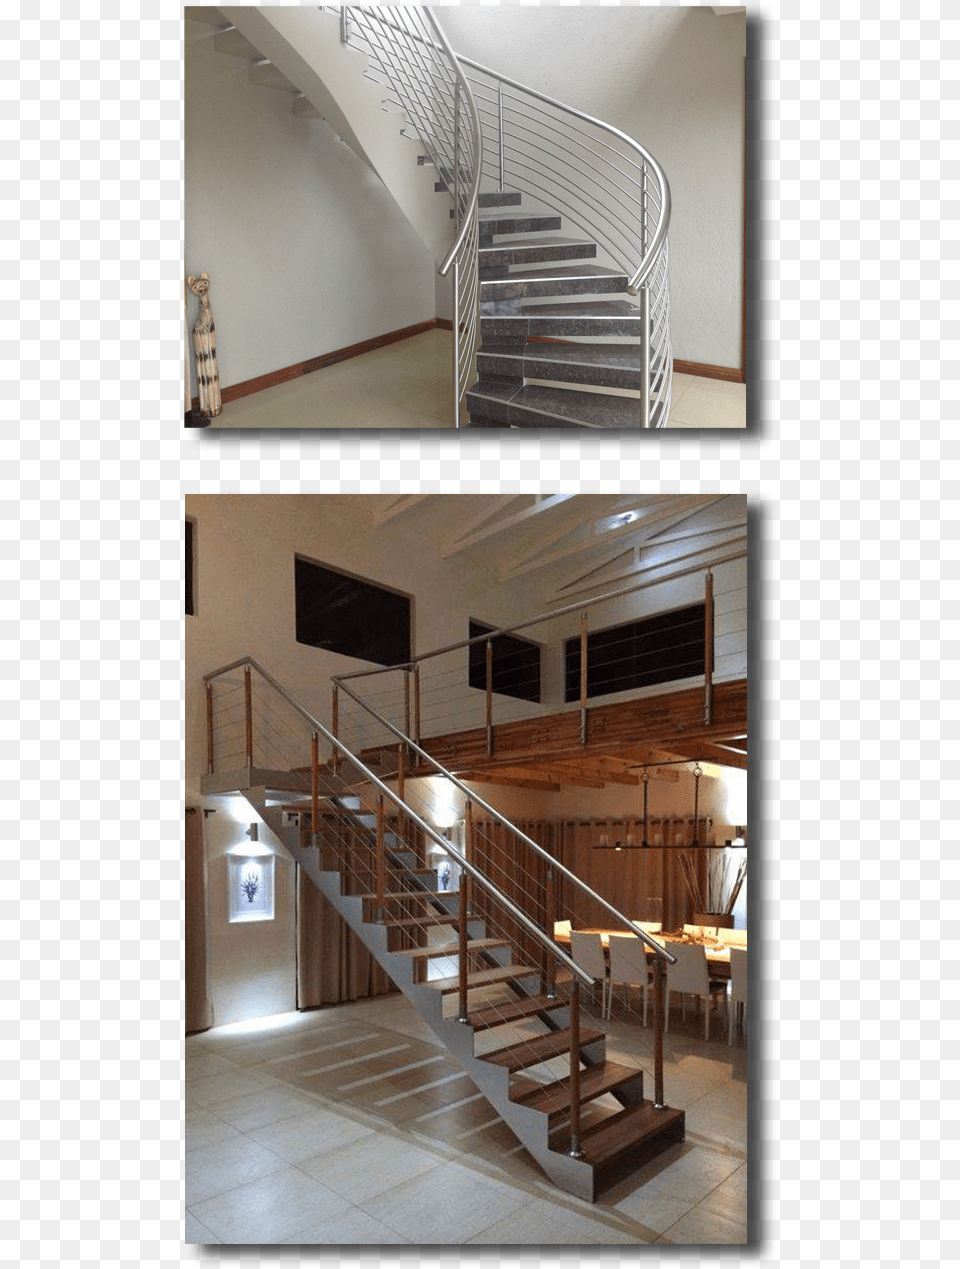 Middelburg And Witbank Staircases, Architecture, Building, Handrail, House Png